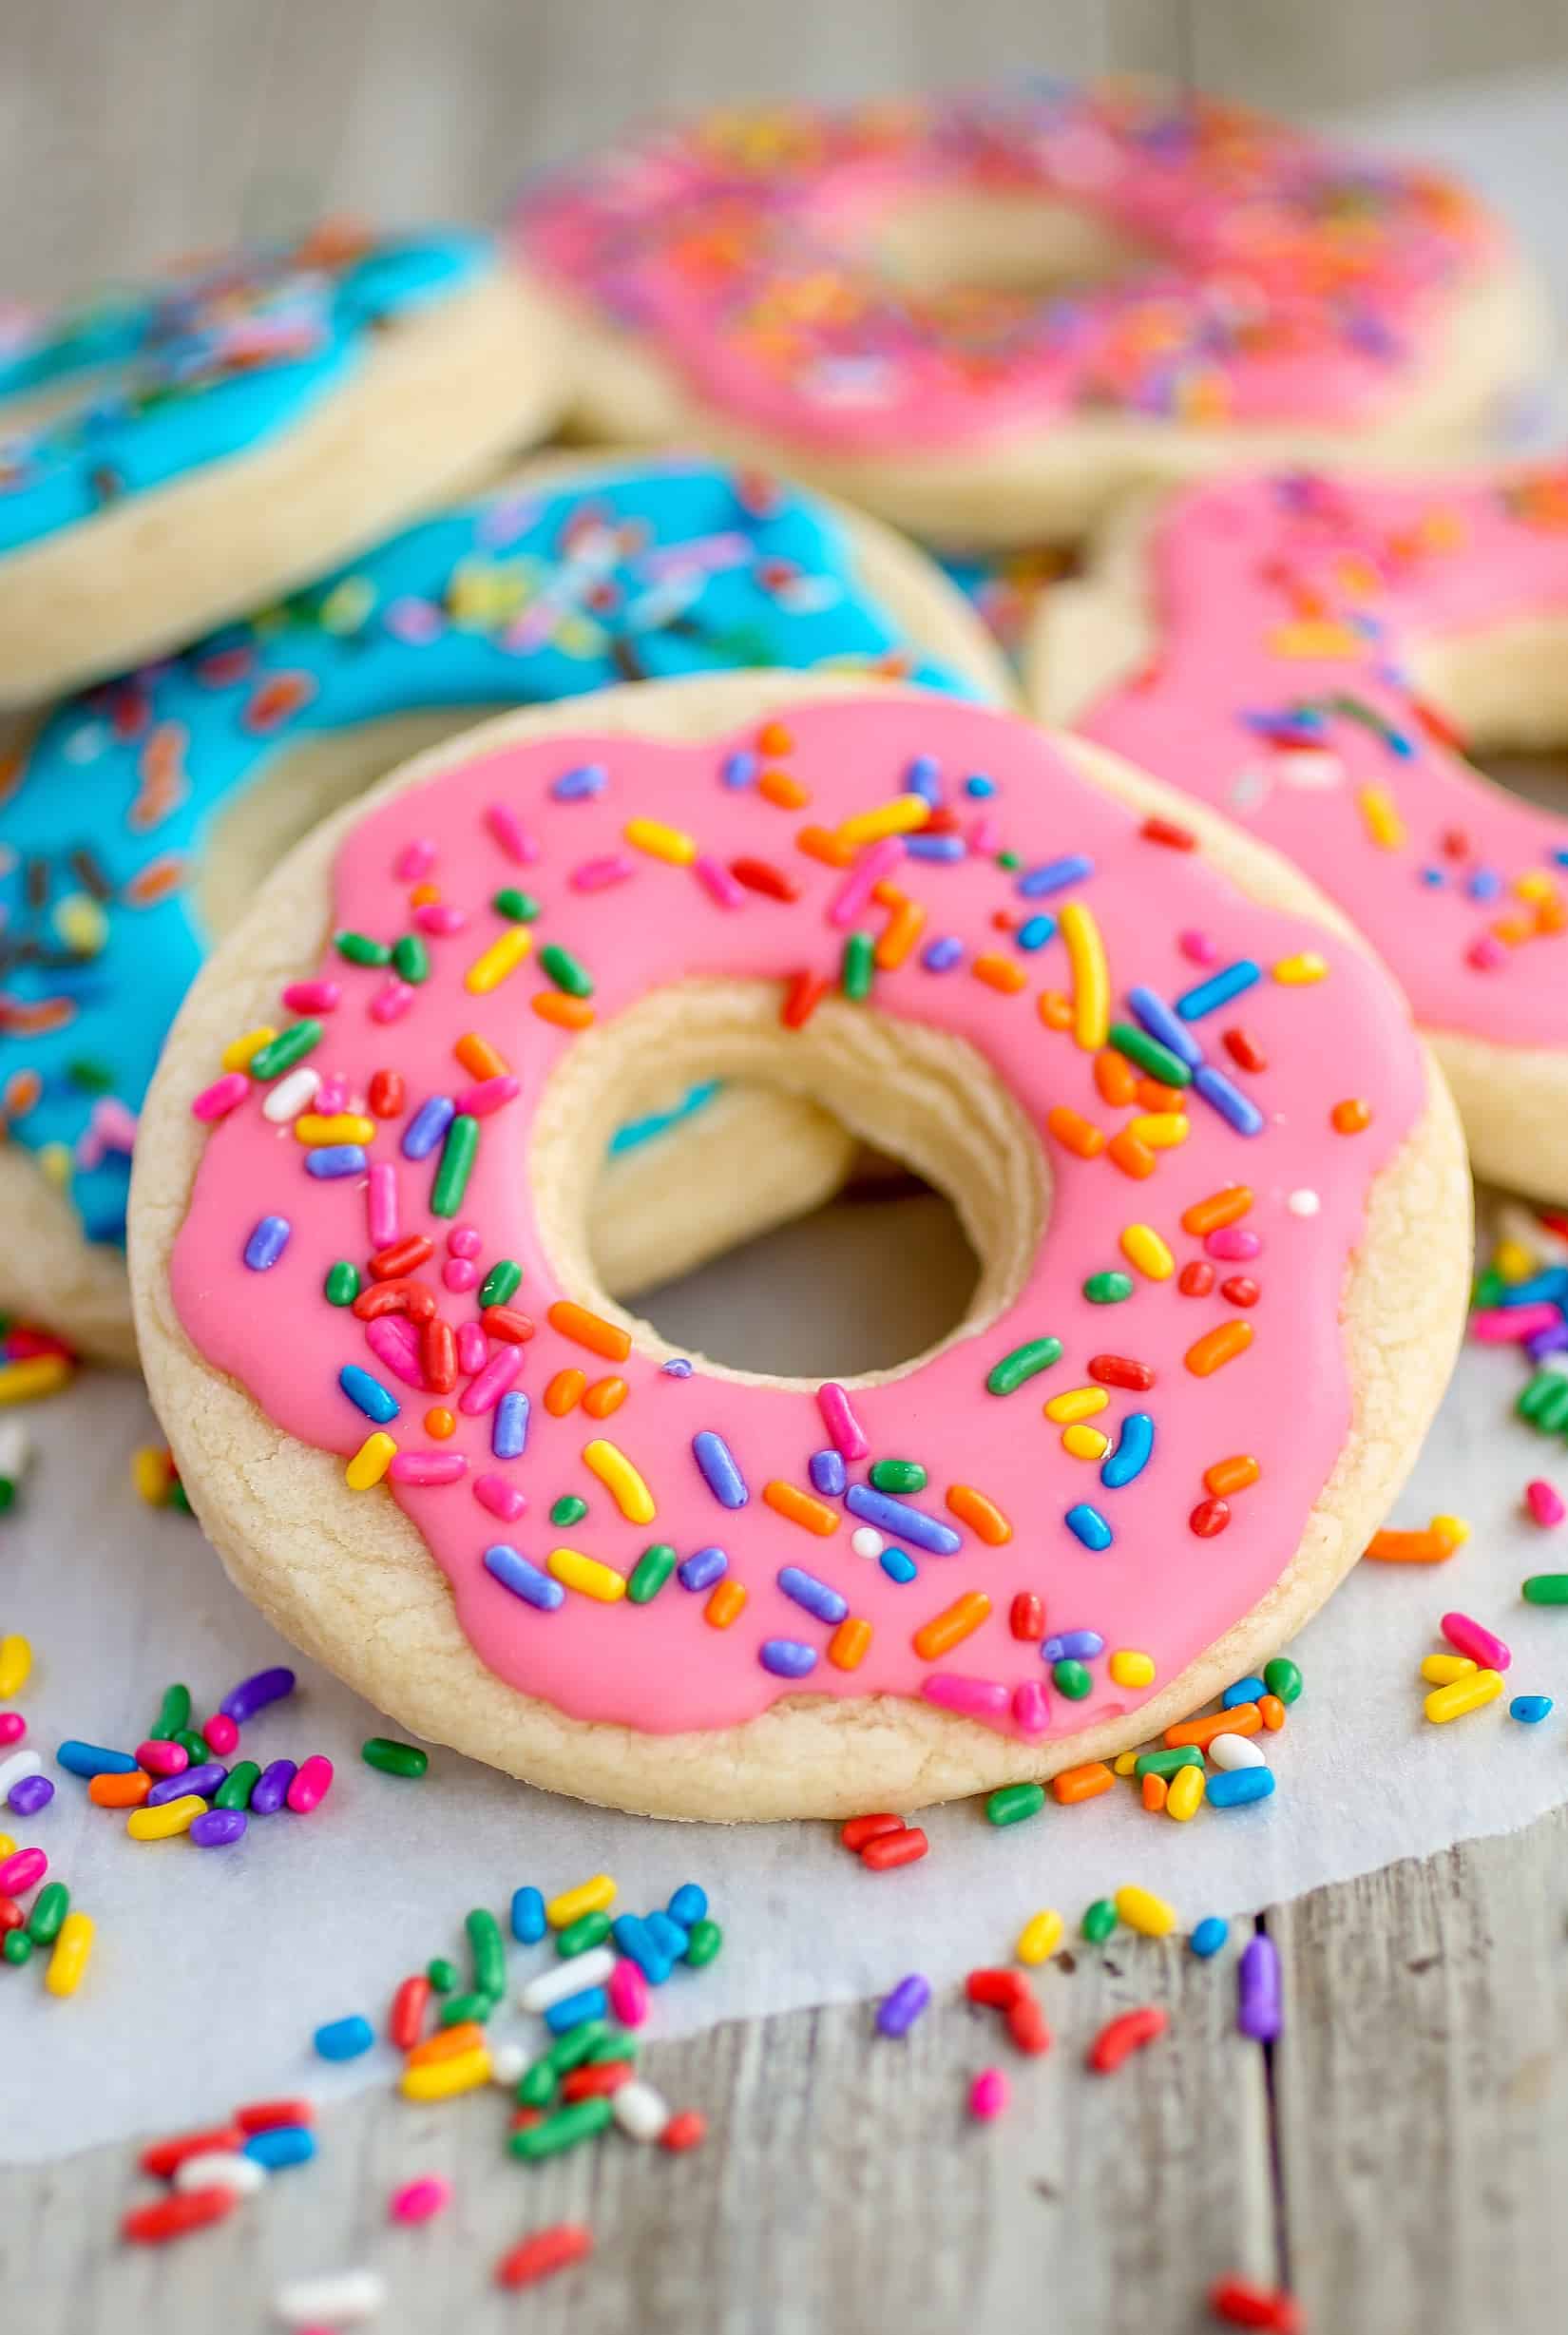 Donut Shaped Sugar Cookies with Royal Icing - Deliciously thick and soft sugar cookies decorated as donuts! These cookies will melt in your mouth!